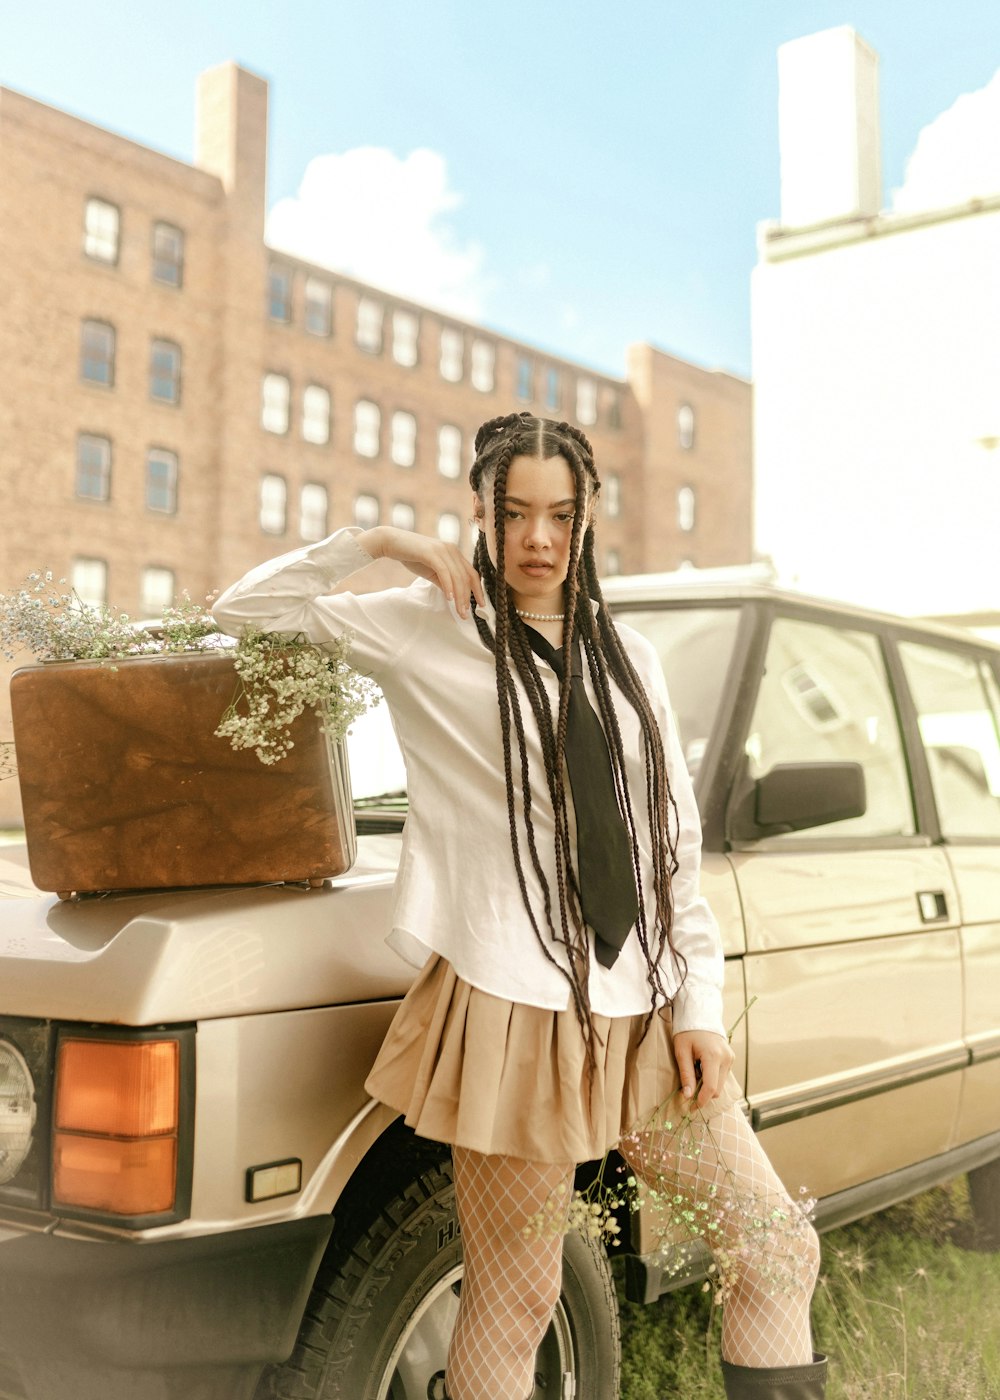 a woman with dreadlocks standing next to a car